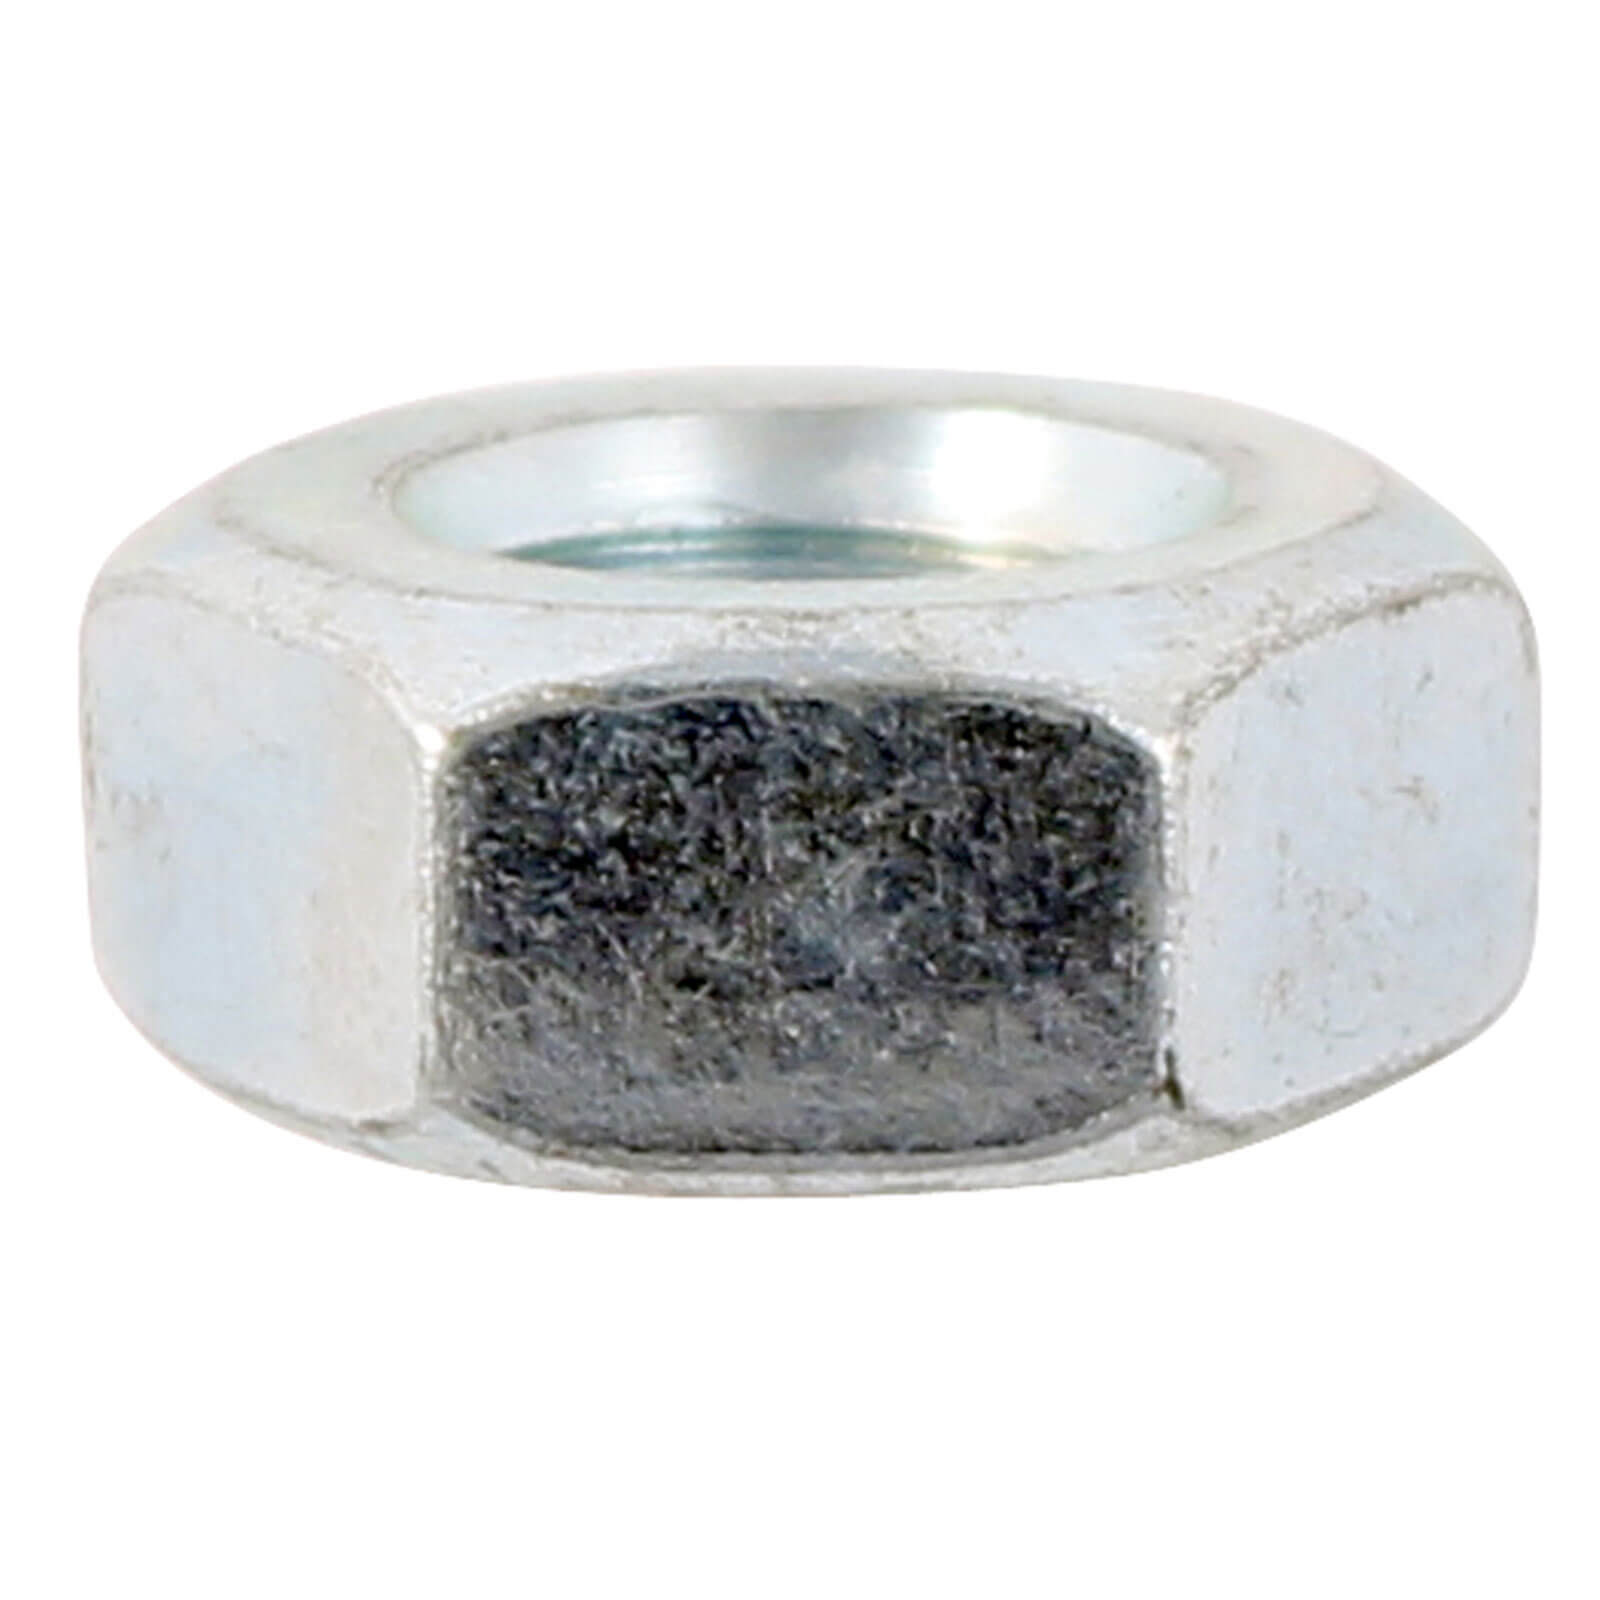 Image of Sirius A4 316 Hex Full Nut Stainless Steel M12